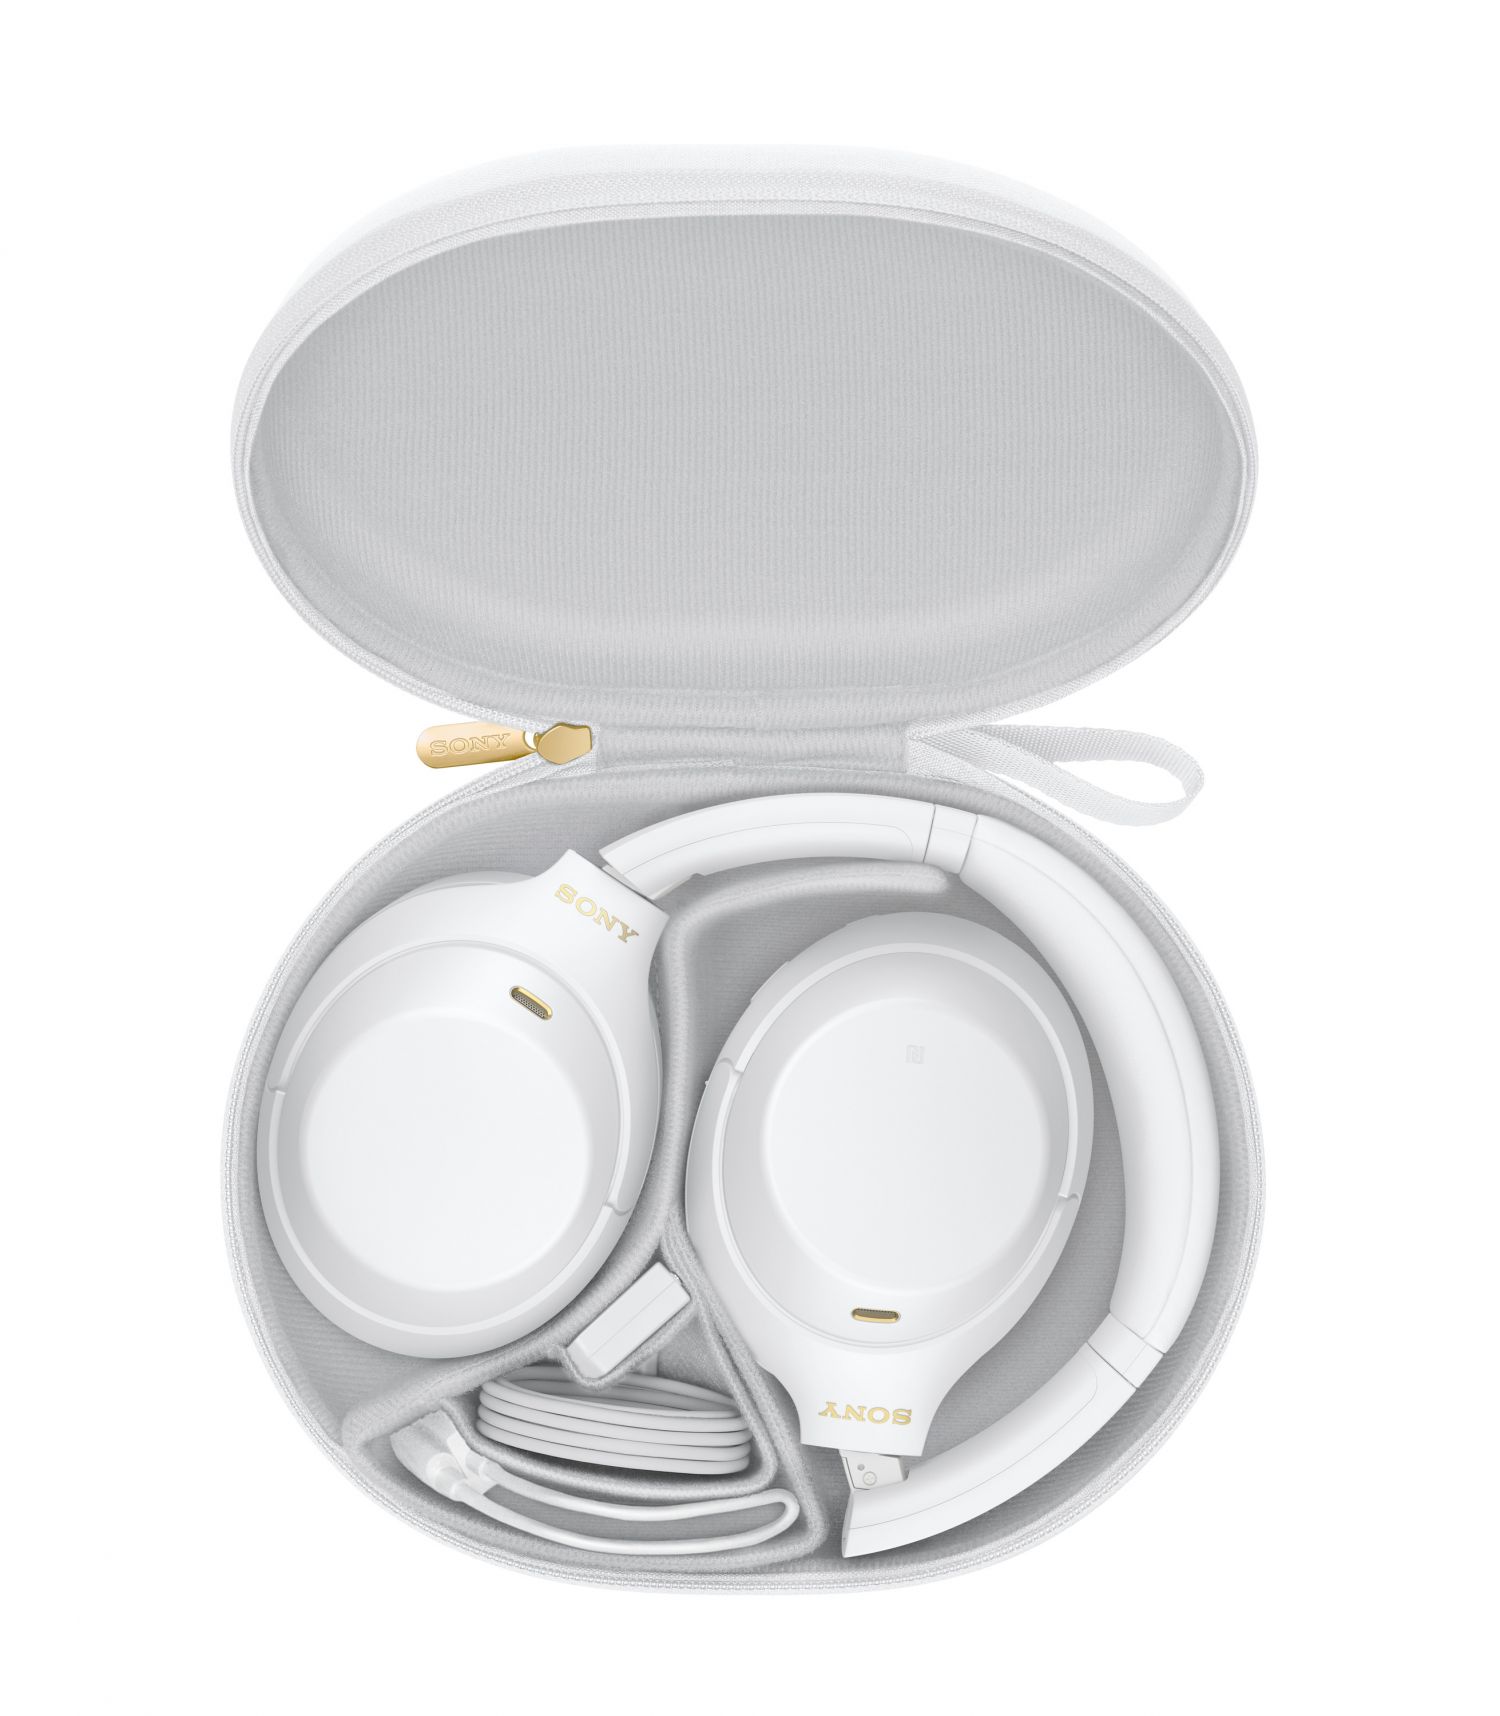 Sony Launches New Limited Edition Silent White WH-1000XM4 In